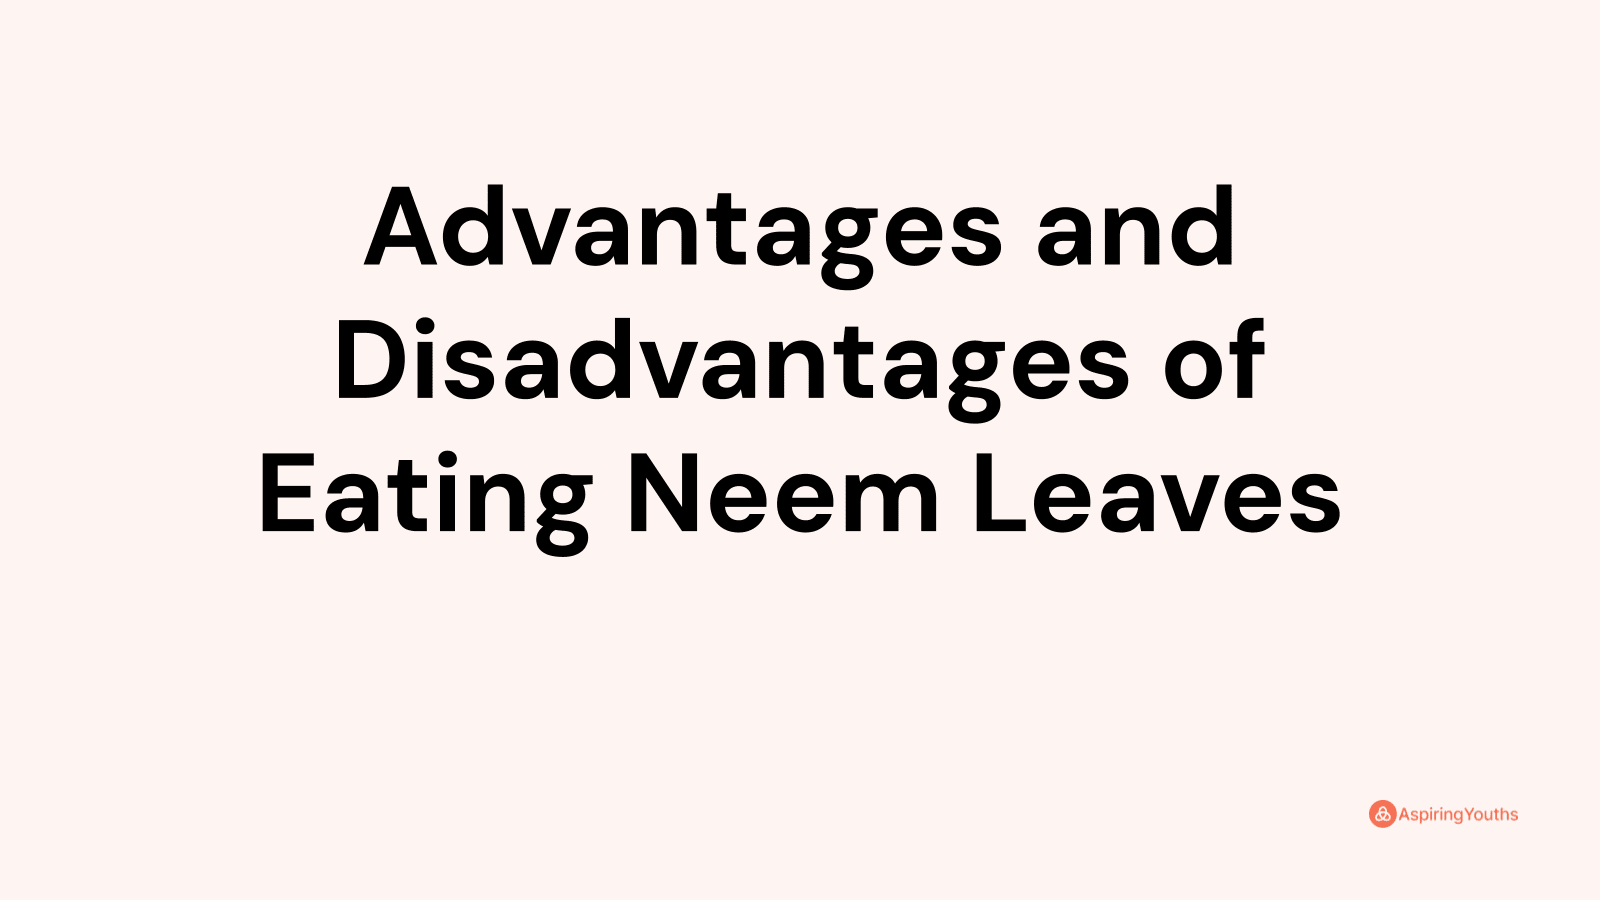 Advantages and disadvantages of Eating Neem Leaves